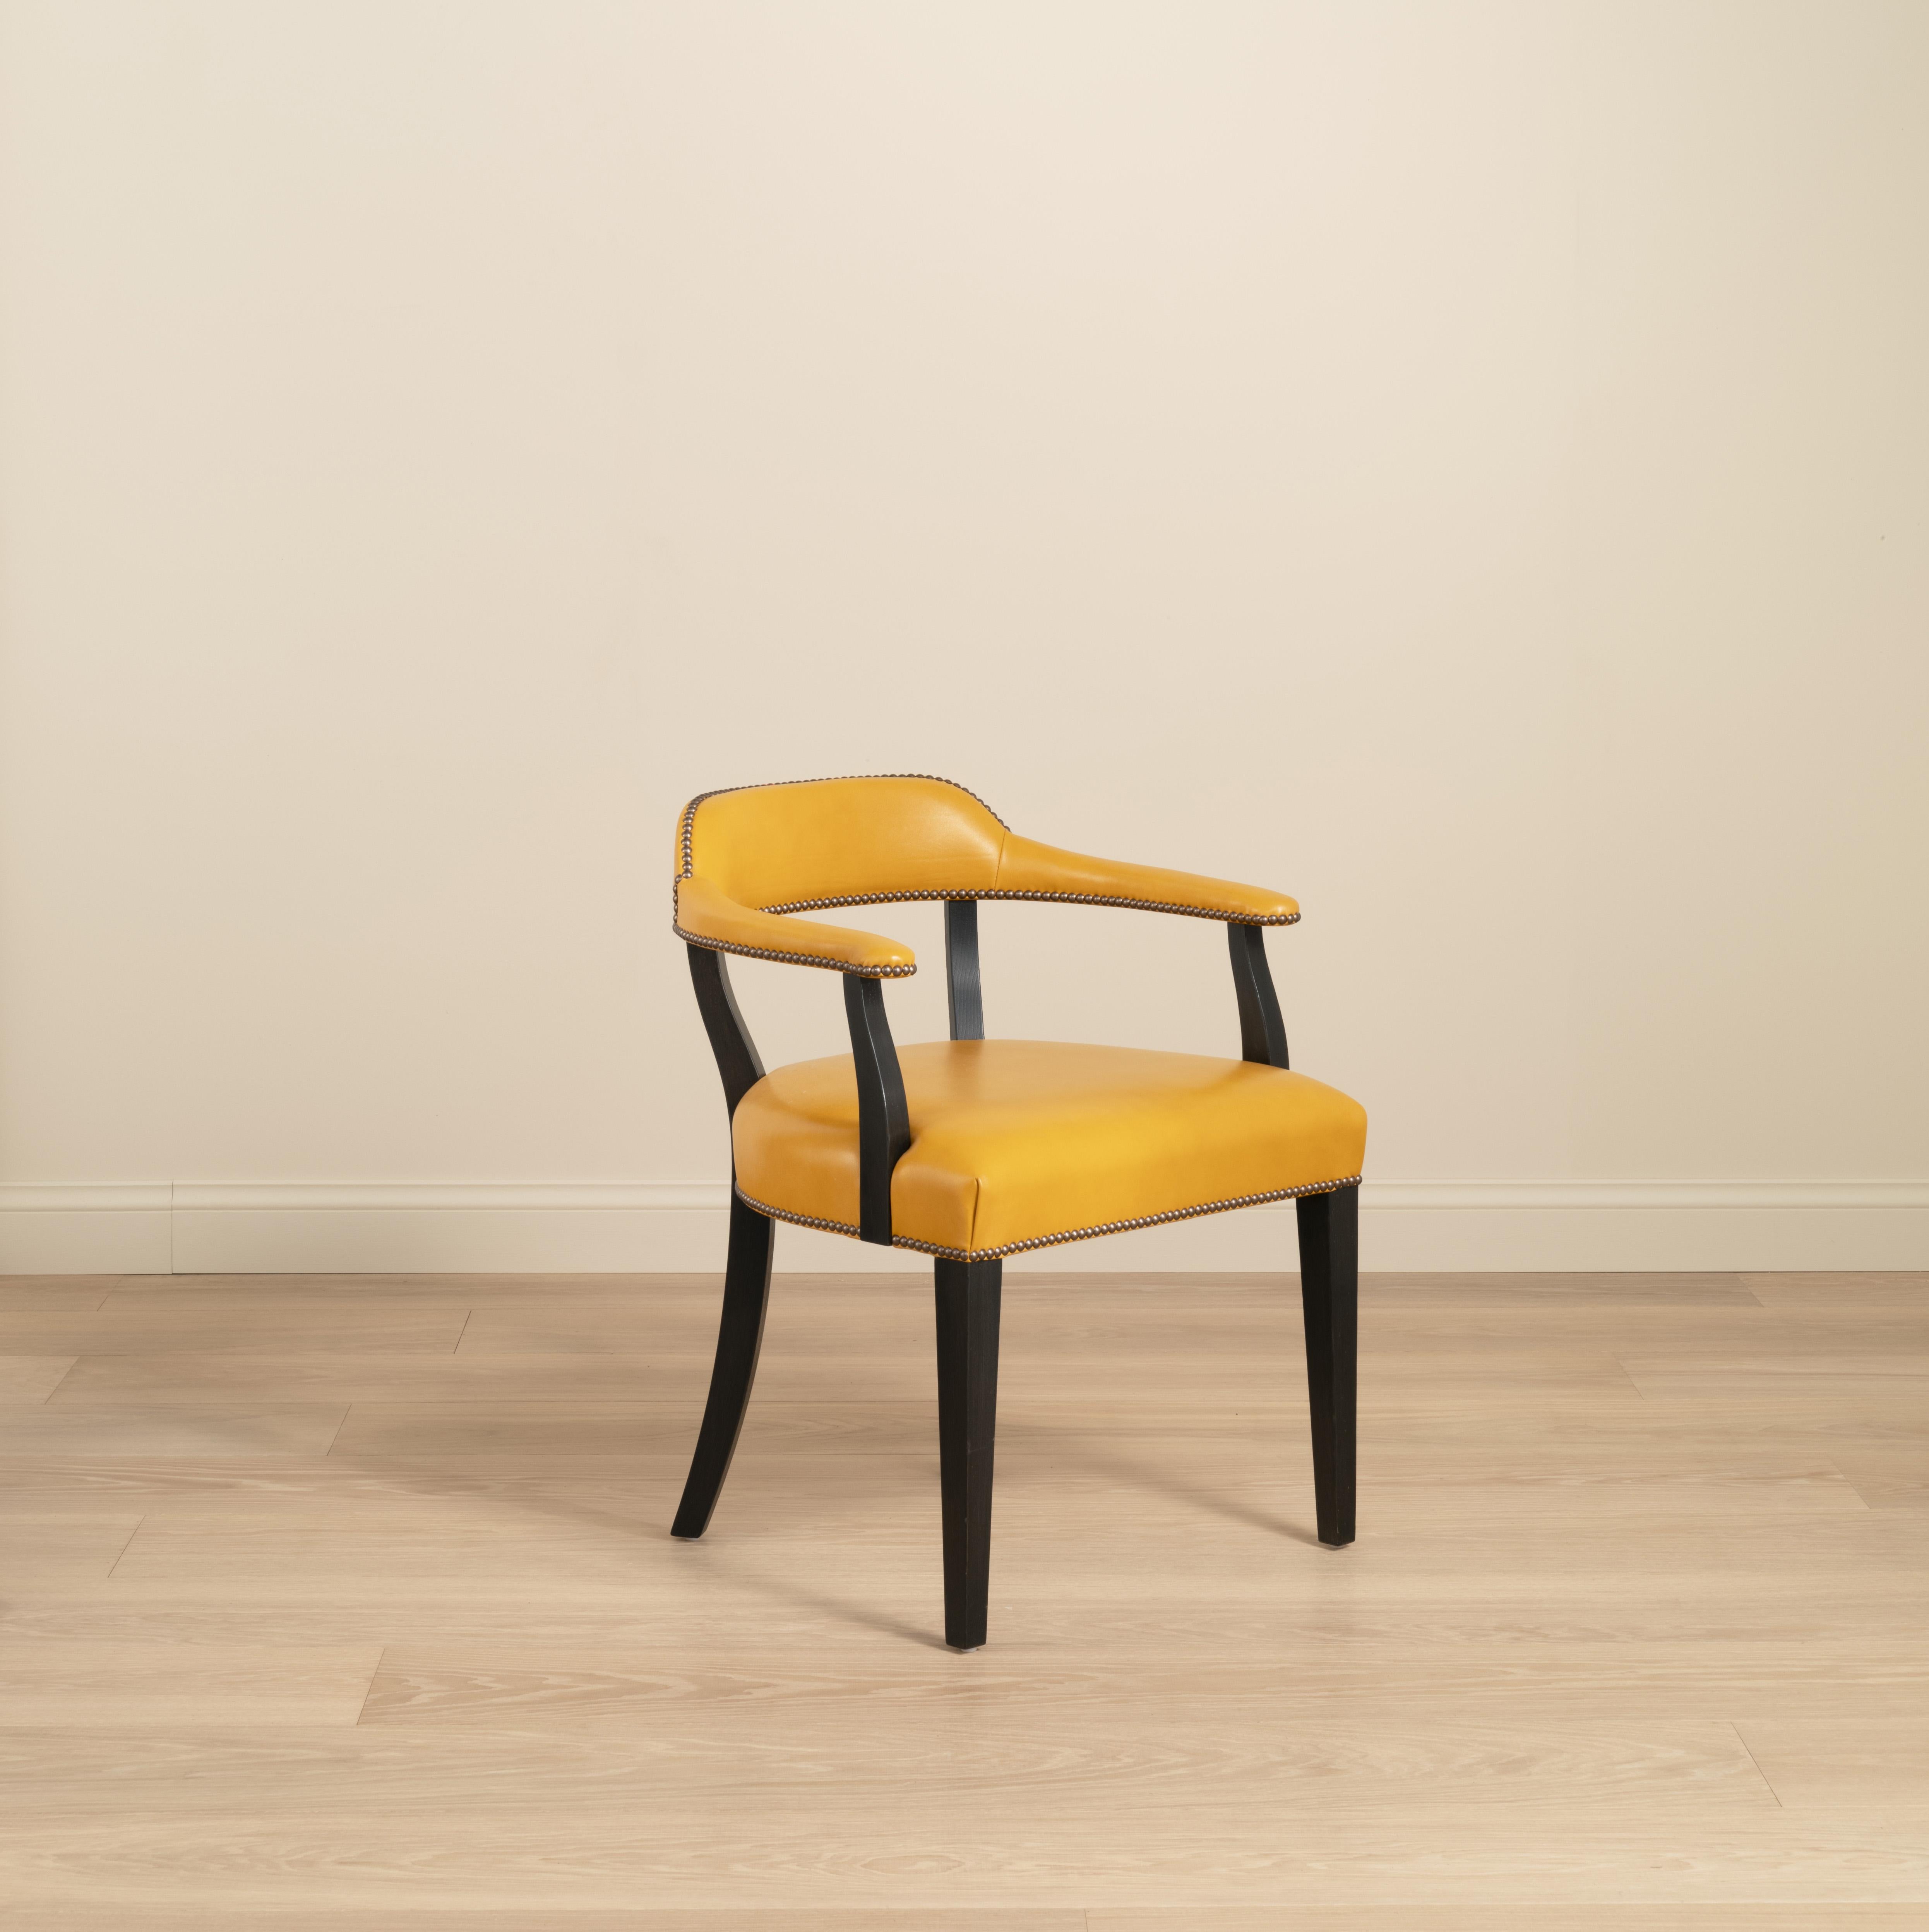 Our signature Croft Chair sits comfortably in both traditional and contemporary settings, with its generous seat and elegant backrest. Legs and frame in solid oak with a Light, Mid, Dark or Ebonised finish. Upholstered in clients’ own fabric and/or